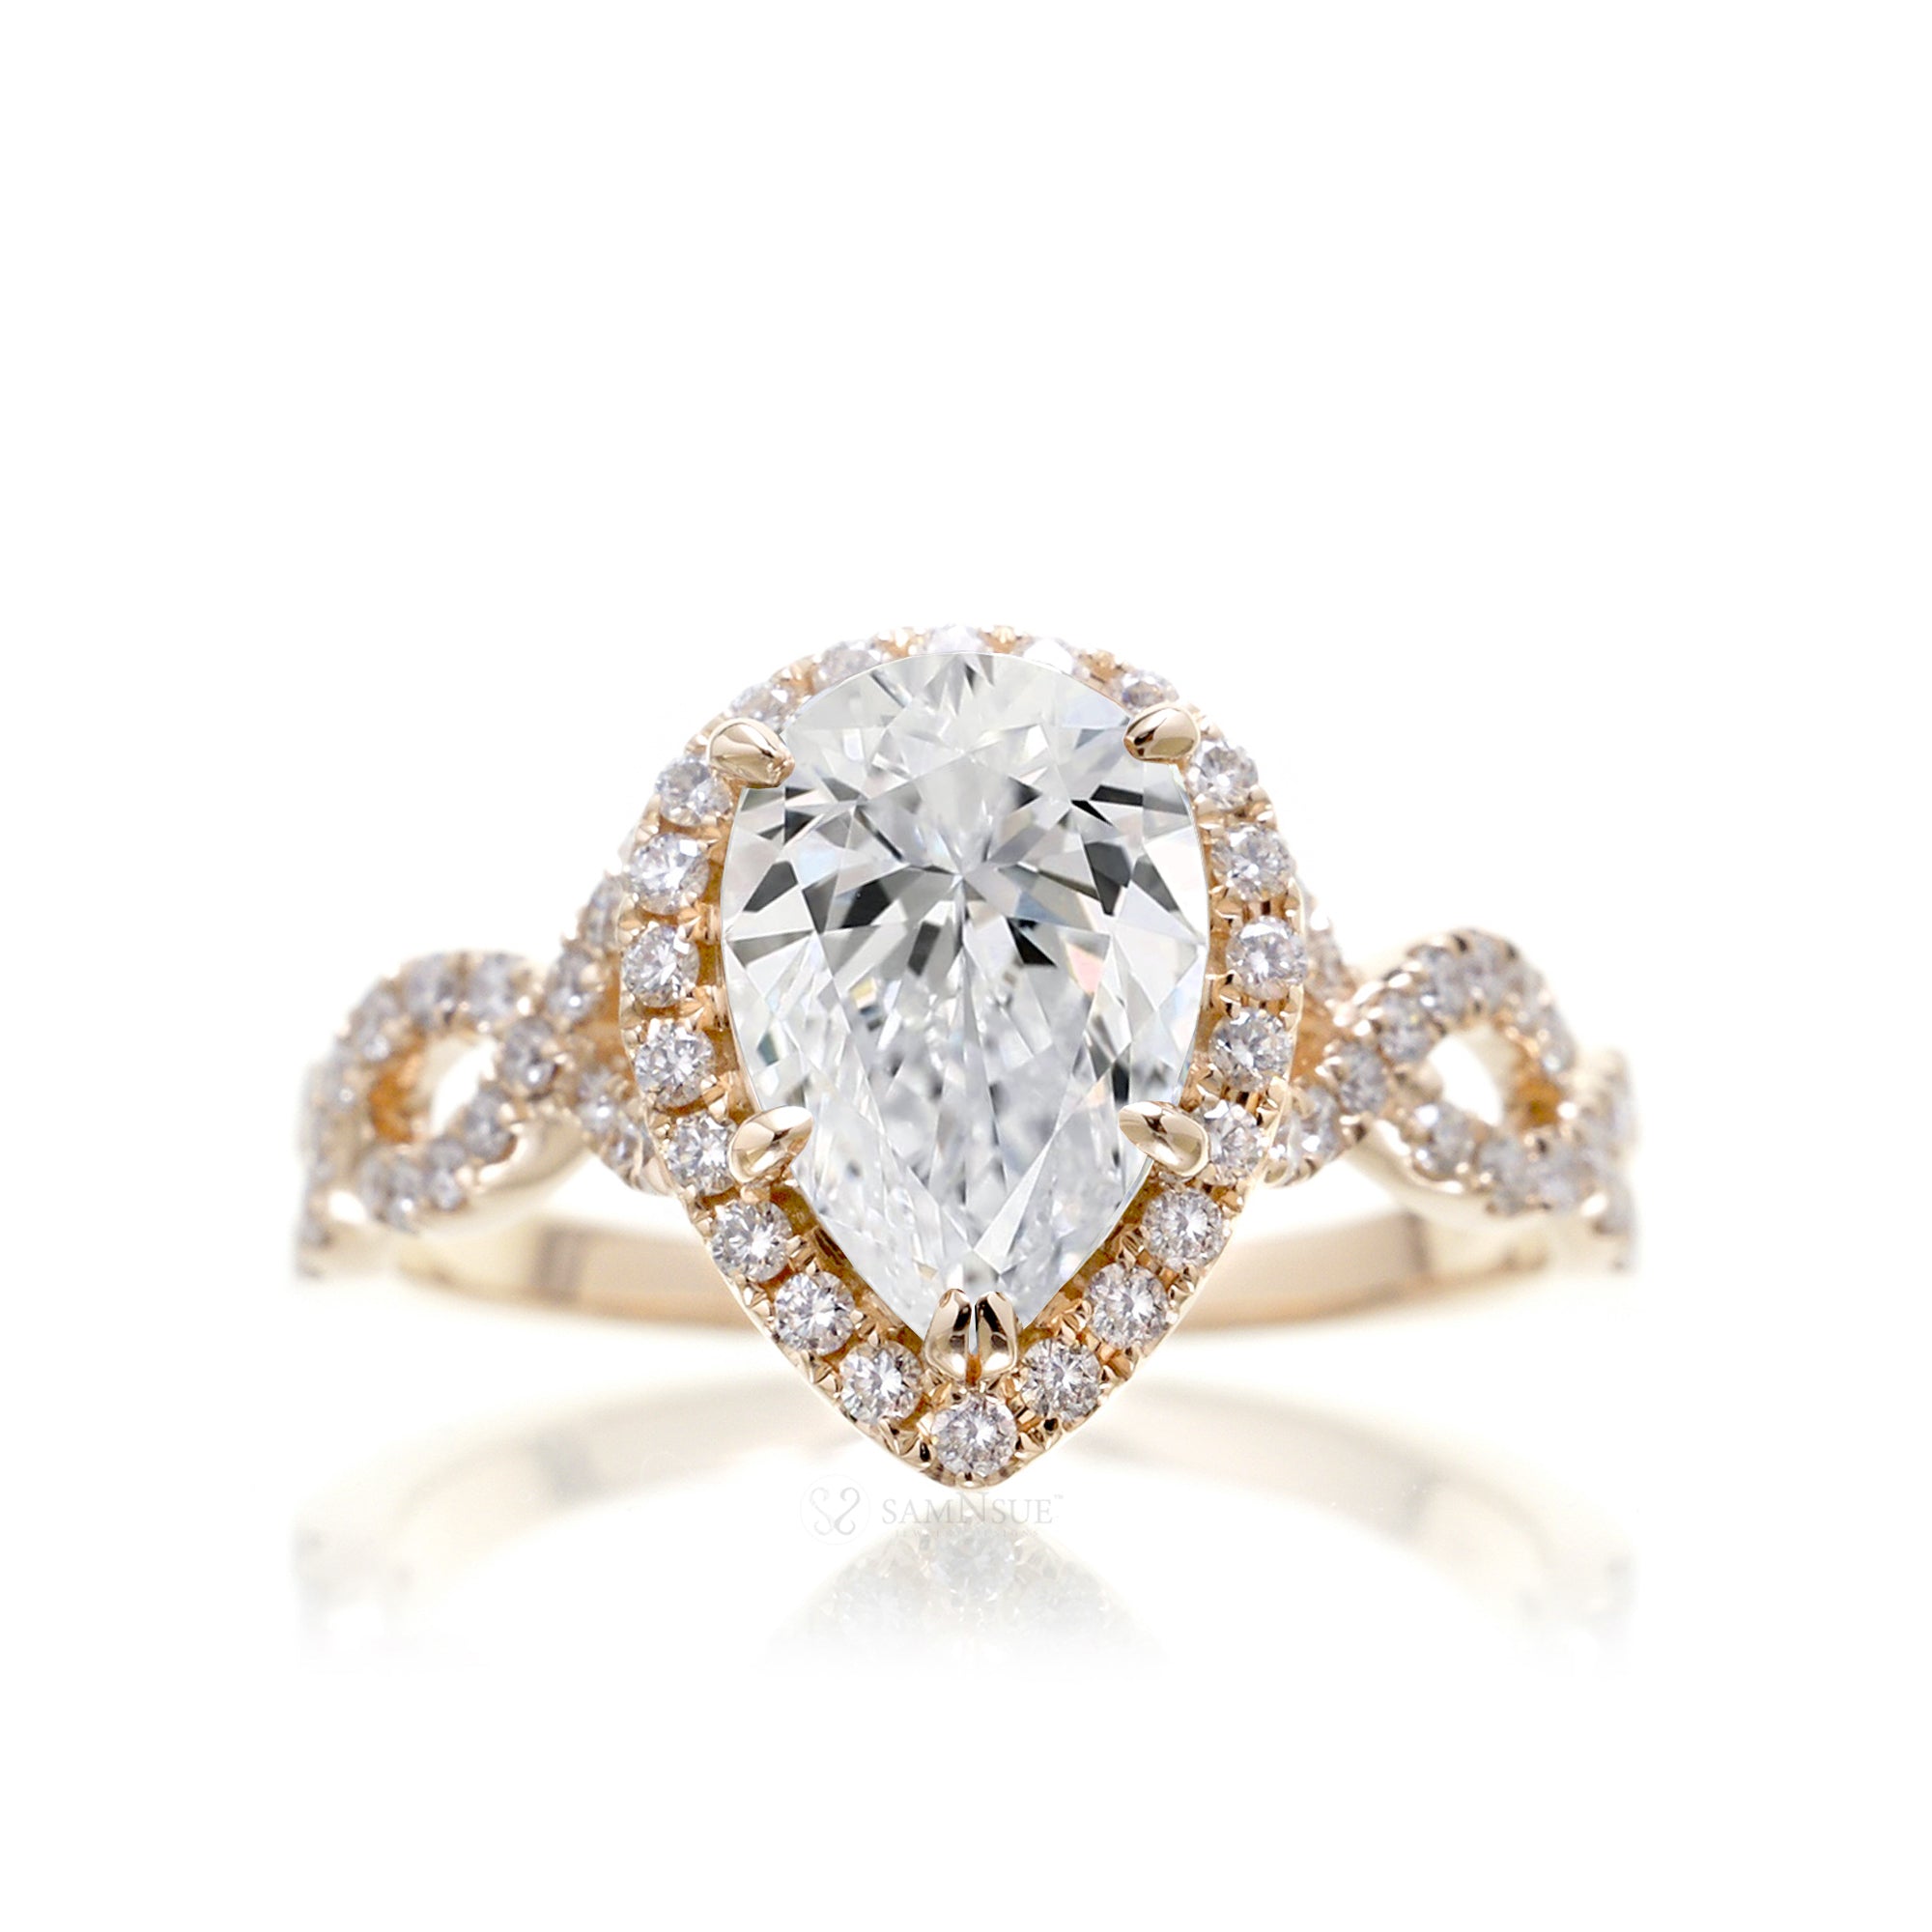 Pear diamond engagement ring halo and twist band yellow gold